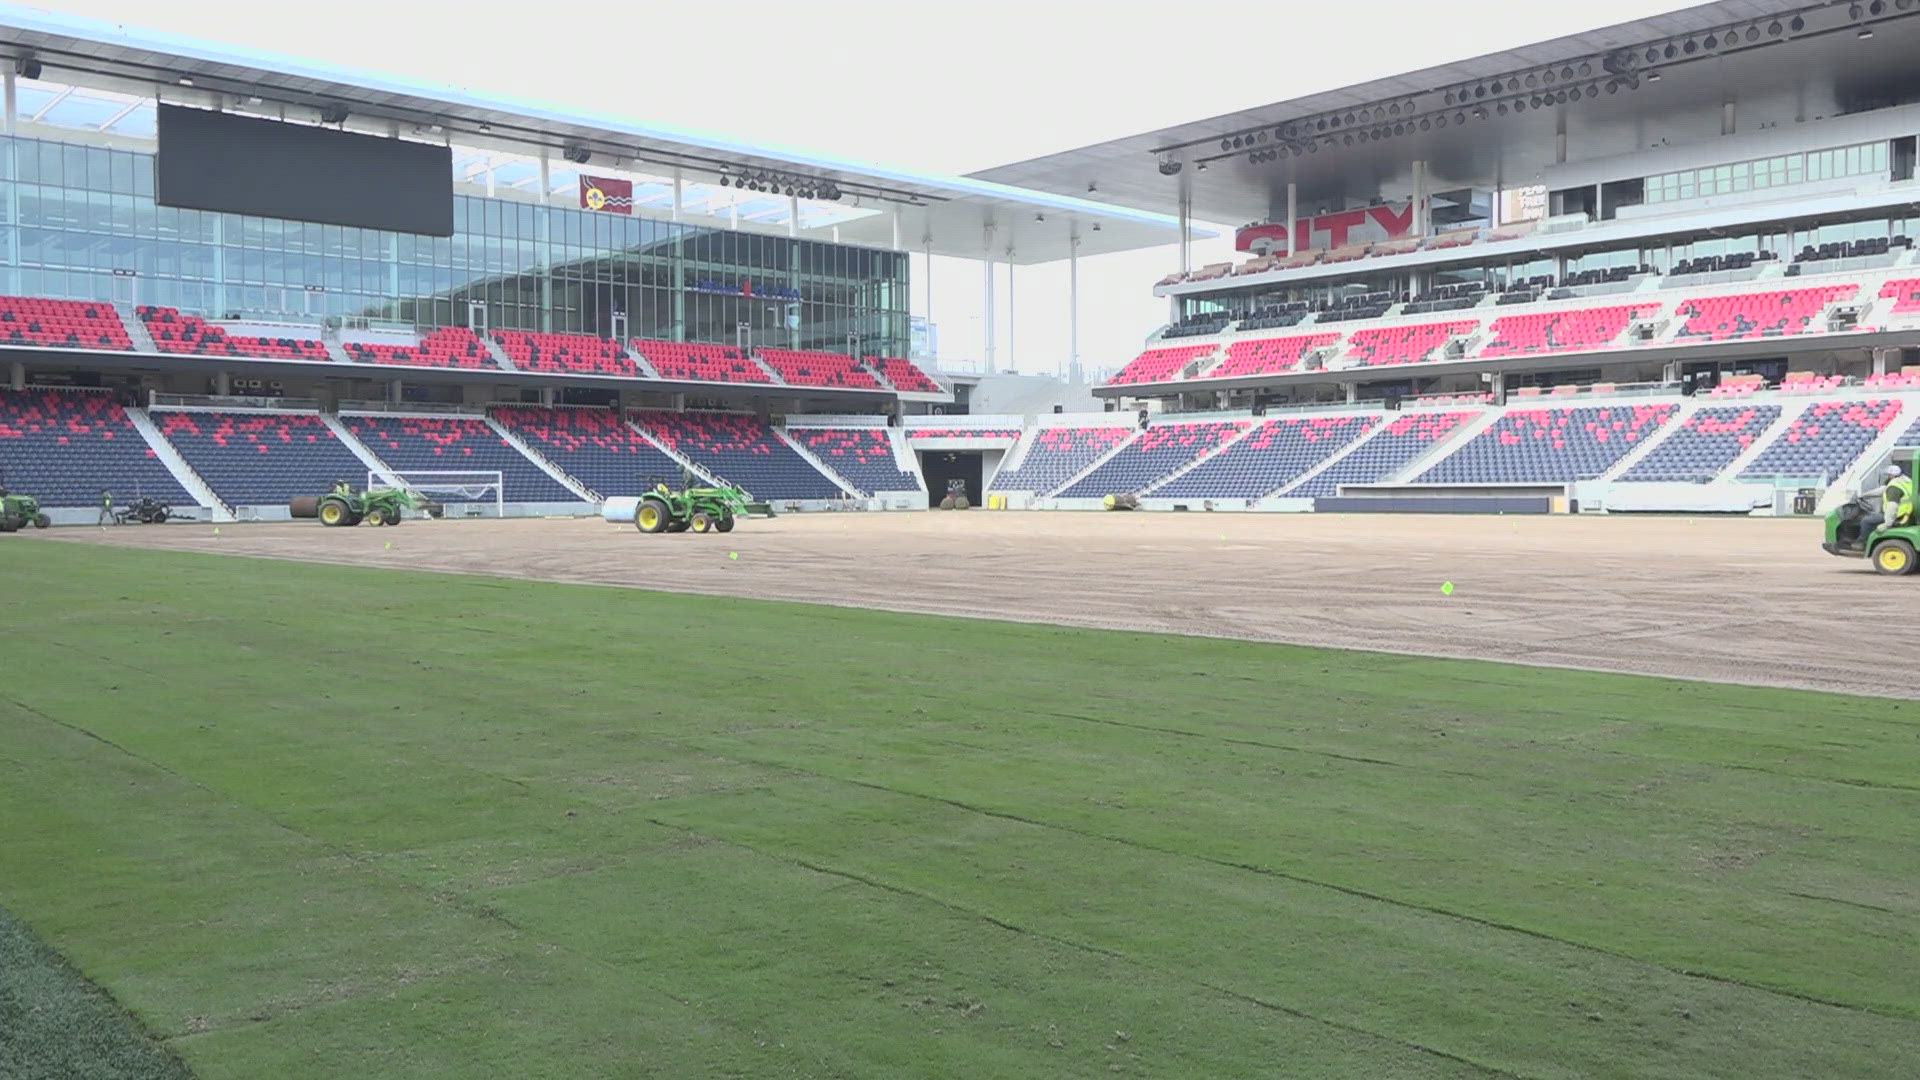 CityPark is getting a new pitch! St. Louis CITY SC is playing away from home, so crews took the opportunity to replace the sod at the soccer stadium.